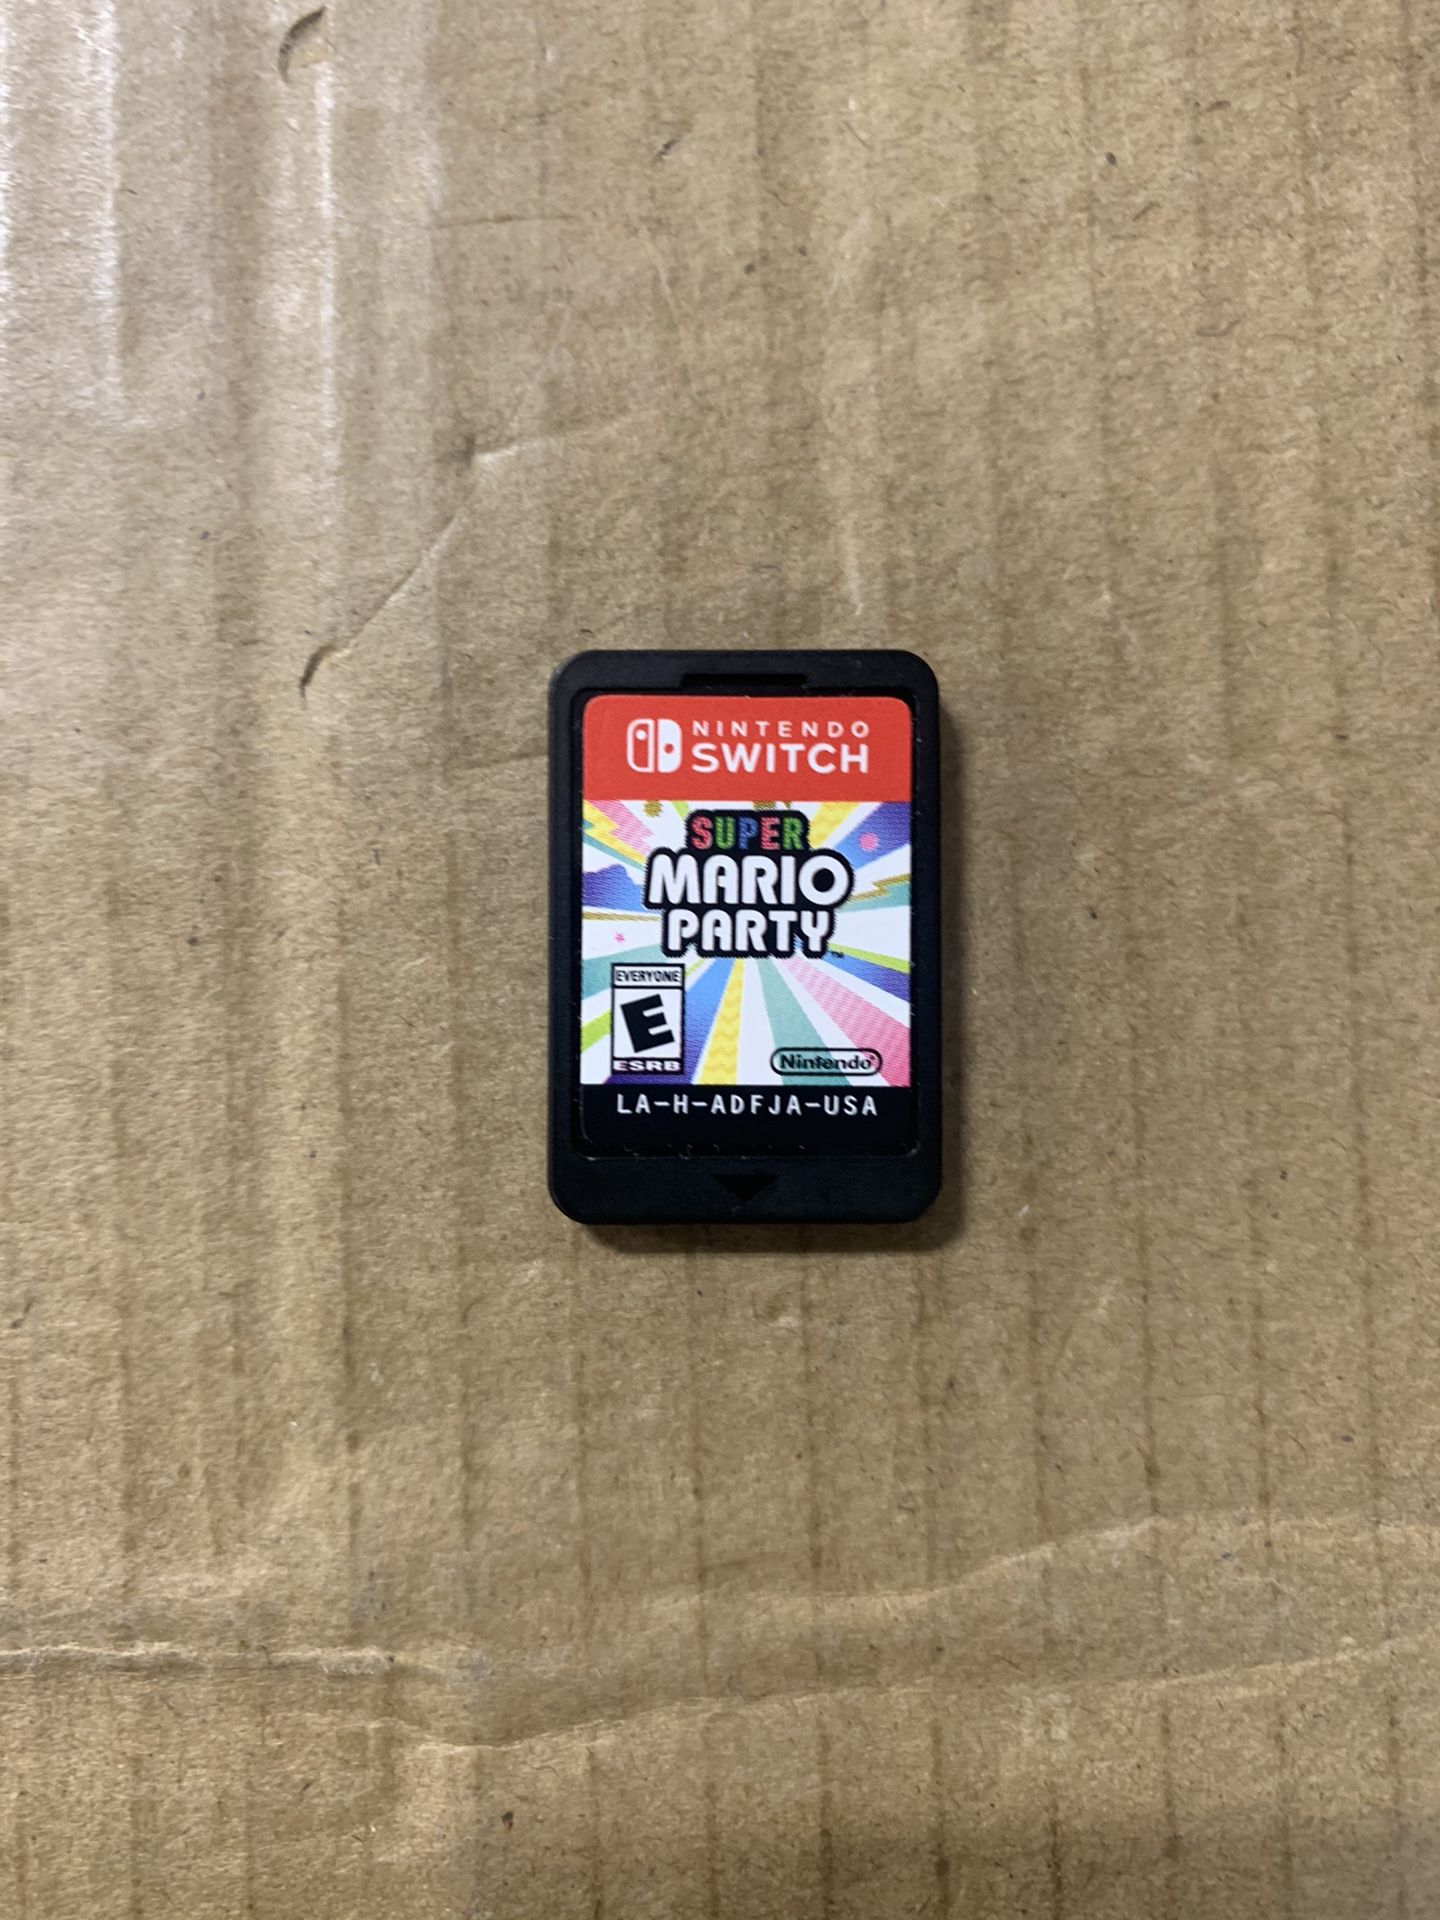 Super Mario Party for Nintendo Switch $40